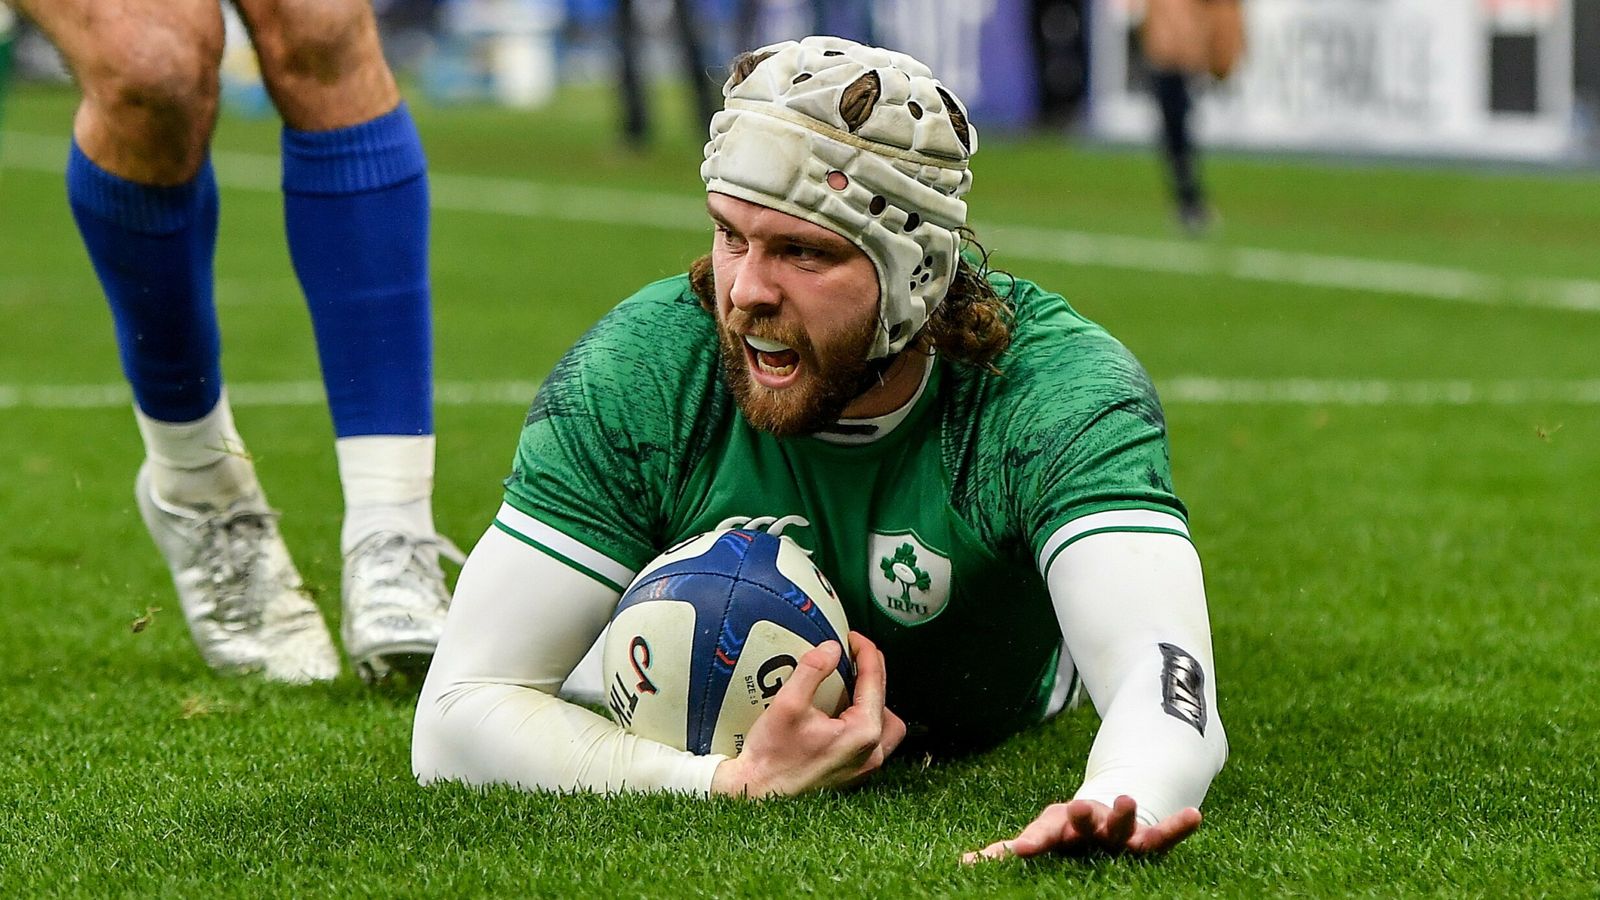 Johnny Sexton Starts And Mack Hansen Replaces Keith Earls For Ireland In Second Test Vs New Zealand